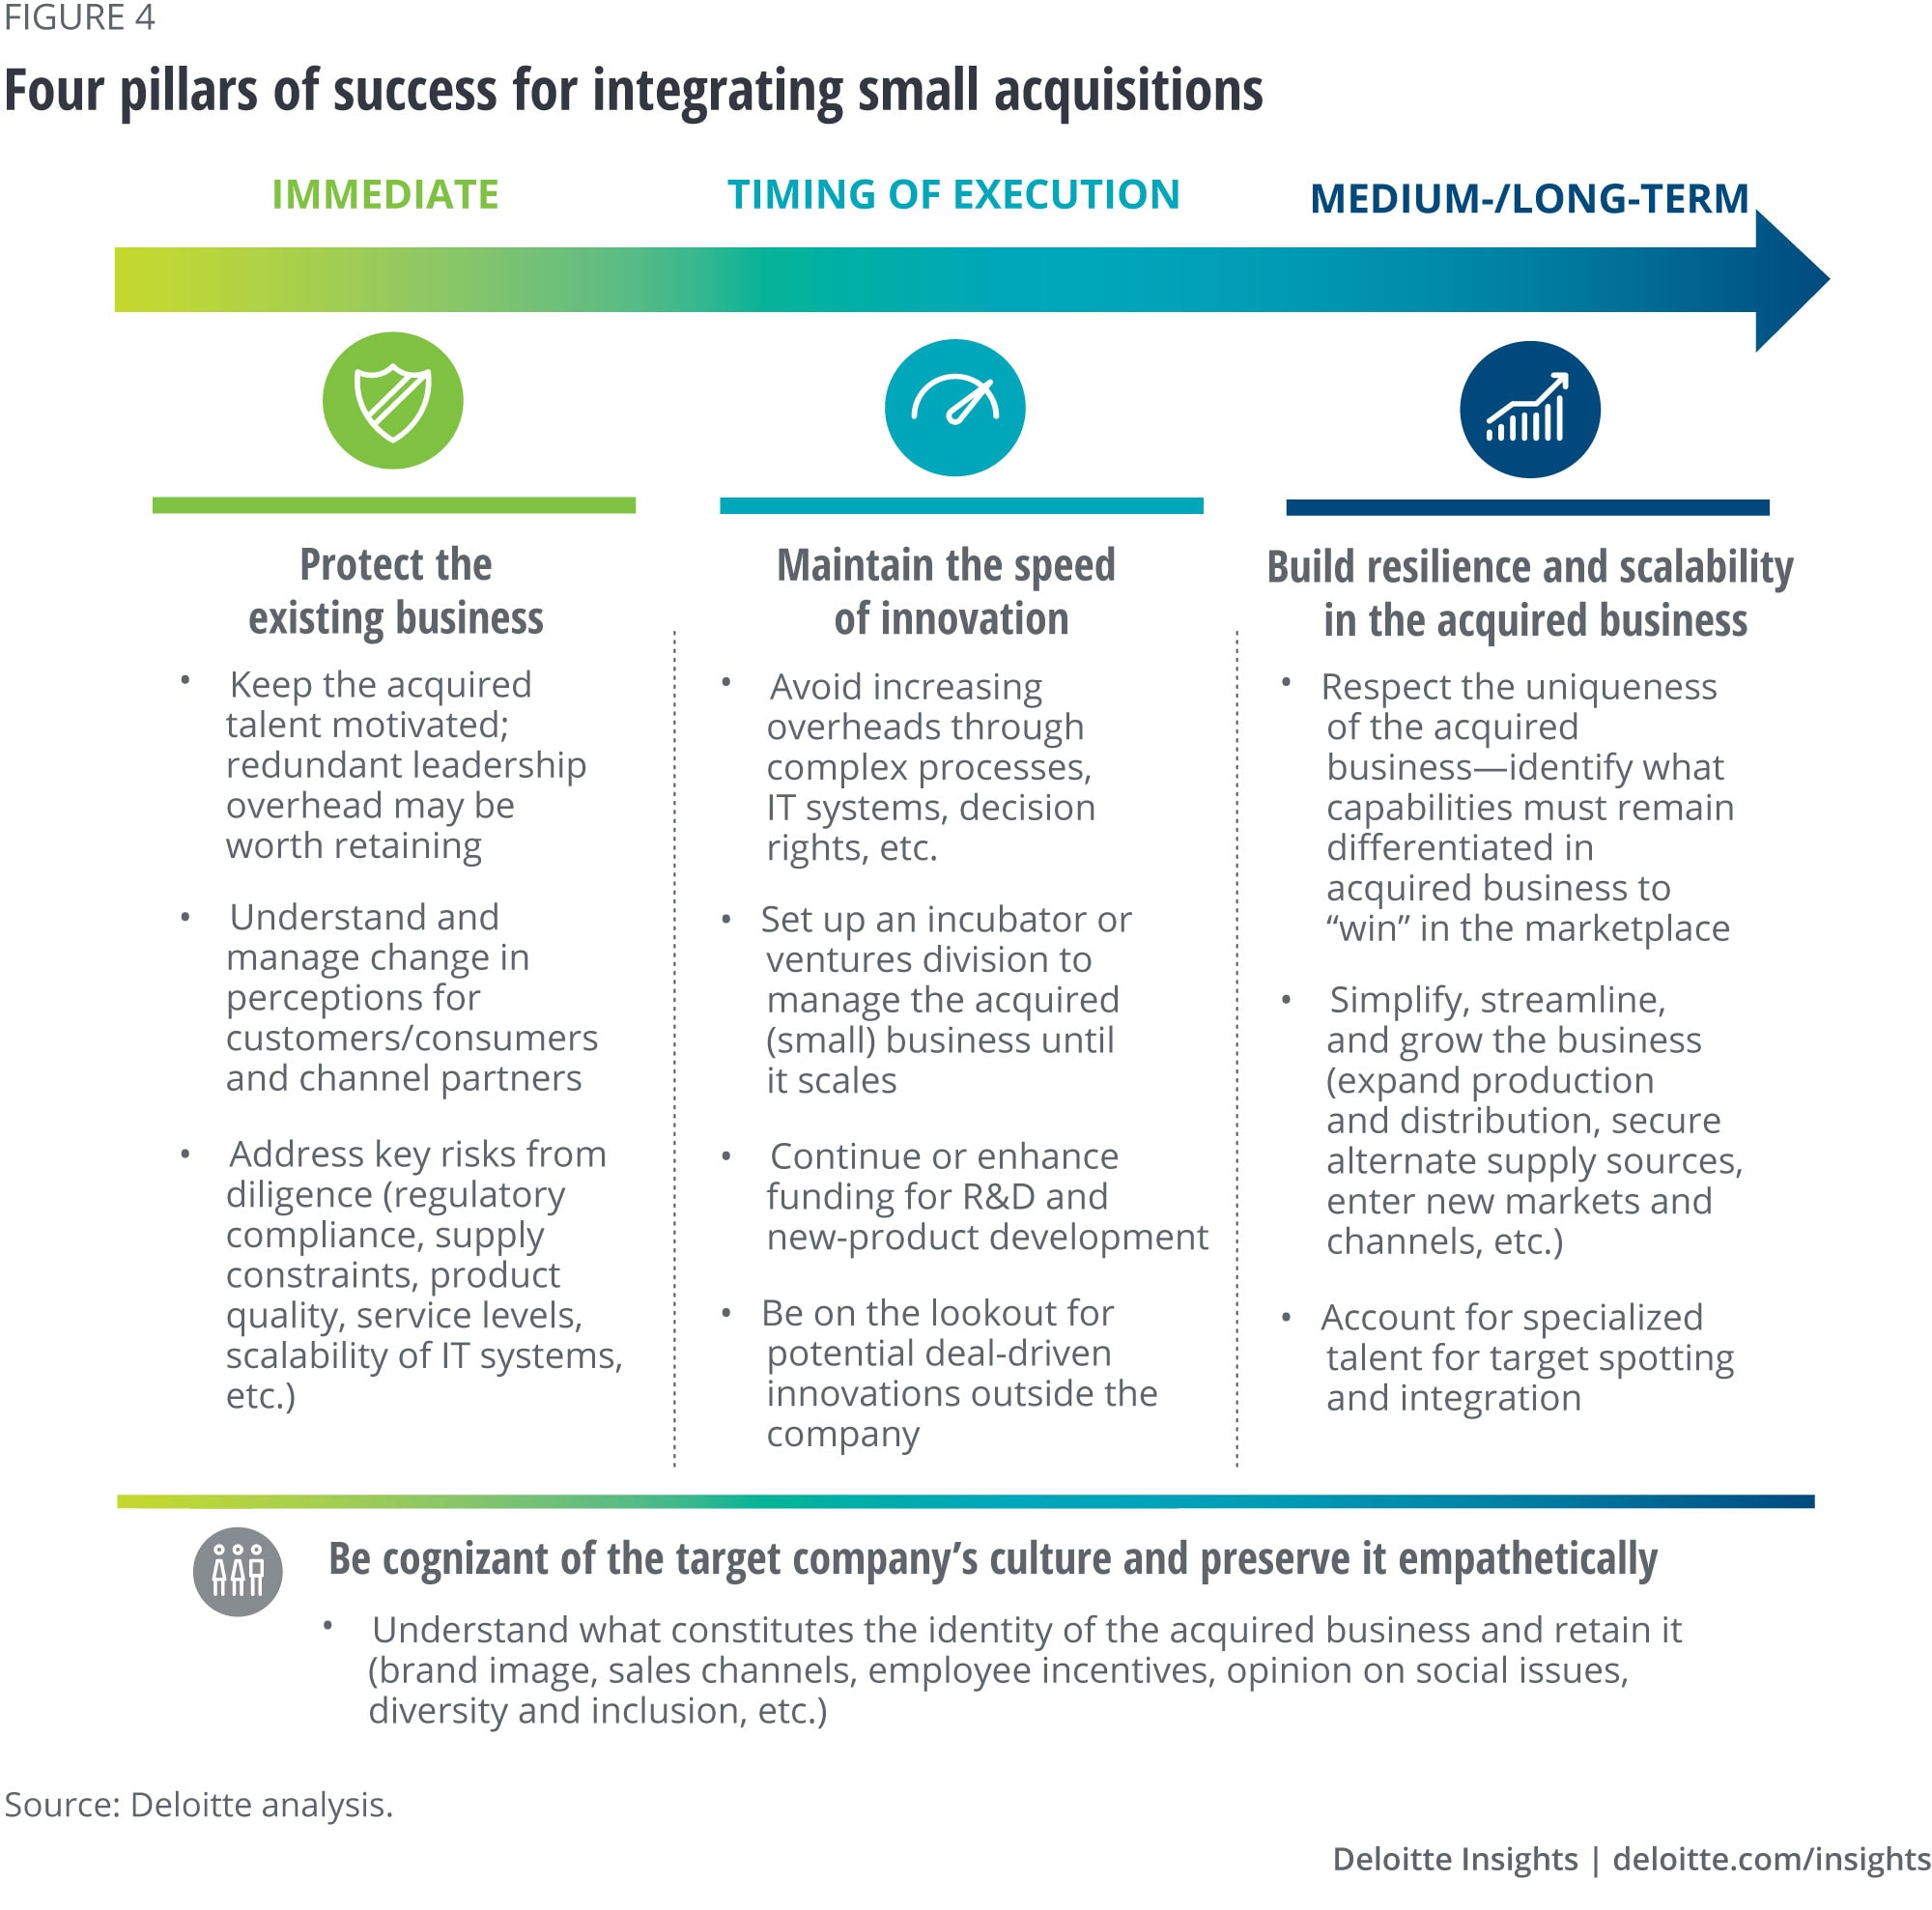 Four pillars of success for integrating small acquisitions